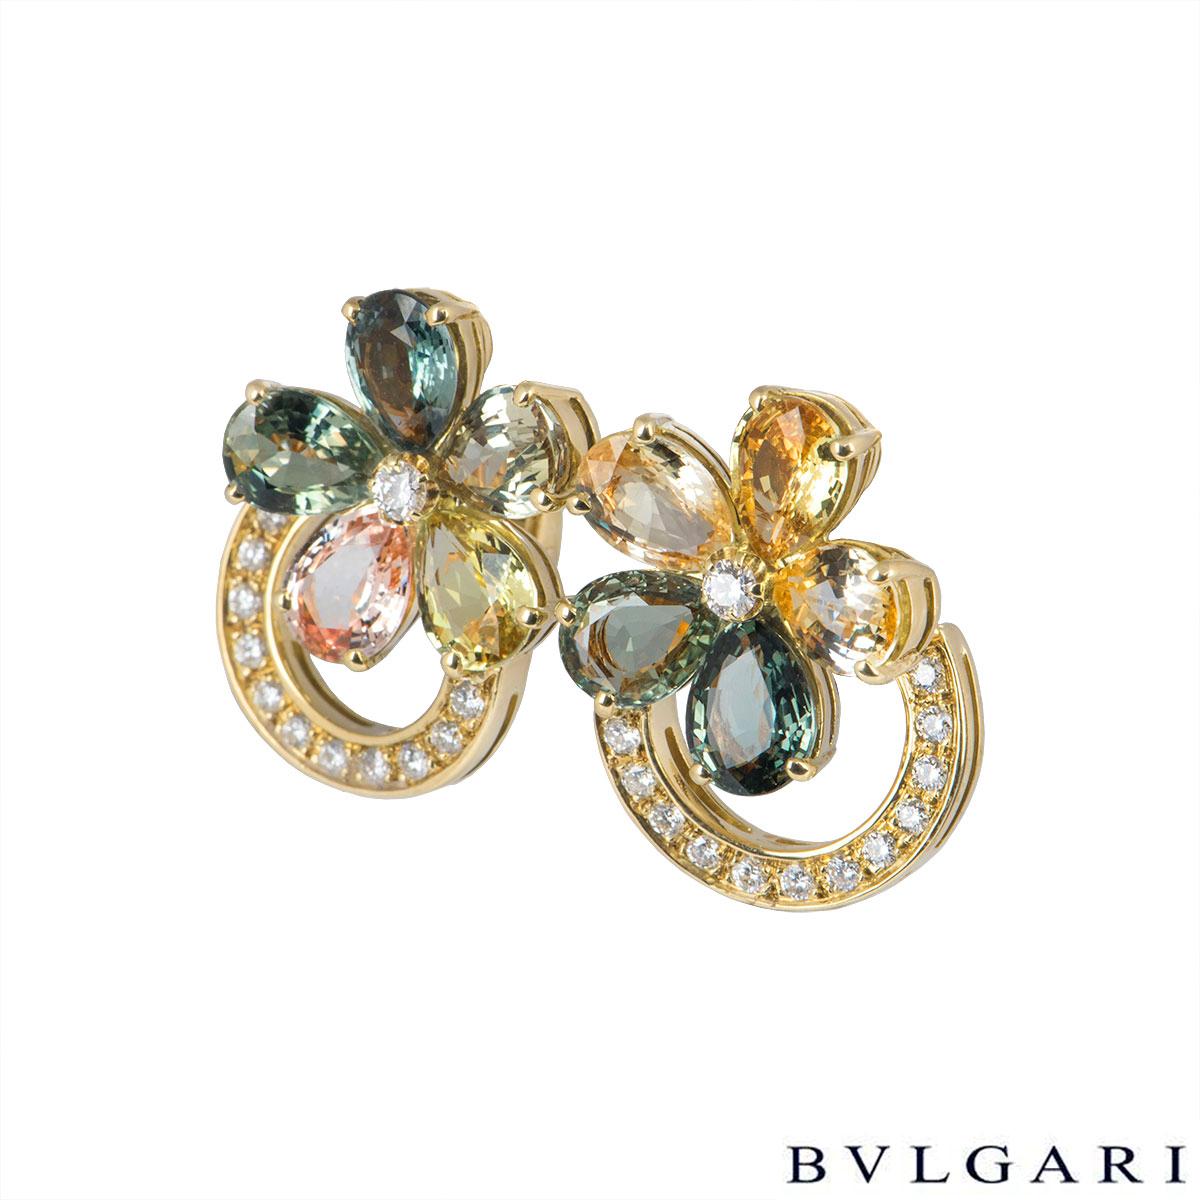 A beautiful pair of 18k yellow gold, diamond and sapphire earrings by Bvlgari from the Sapphire Flower collection. The earrings comprise of a flower motif composed of 5 fancy coloured pear shaped sapphires as petals with 12 round brilliant cut pave